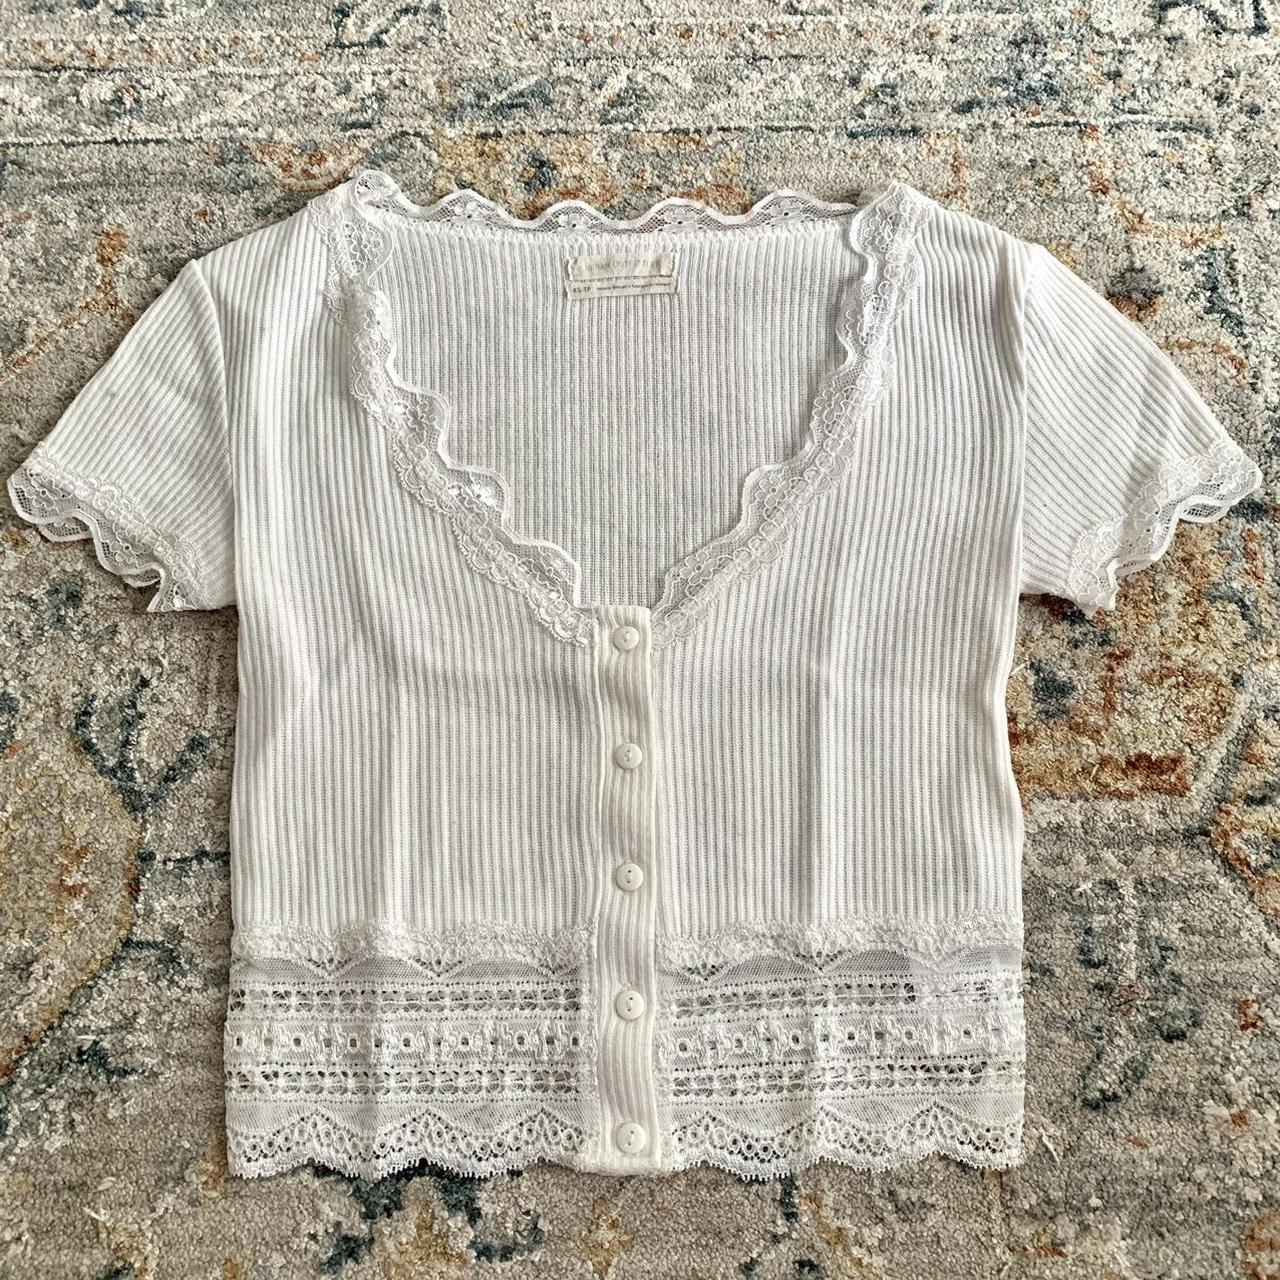 Urban outfitters white lace trim button up short... - Depop